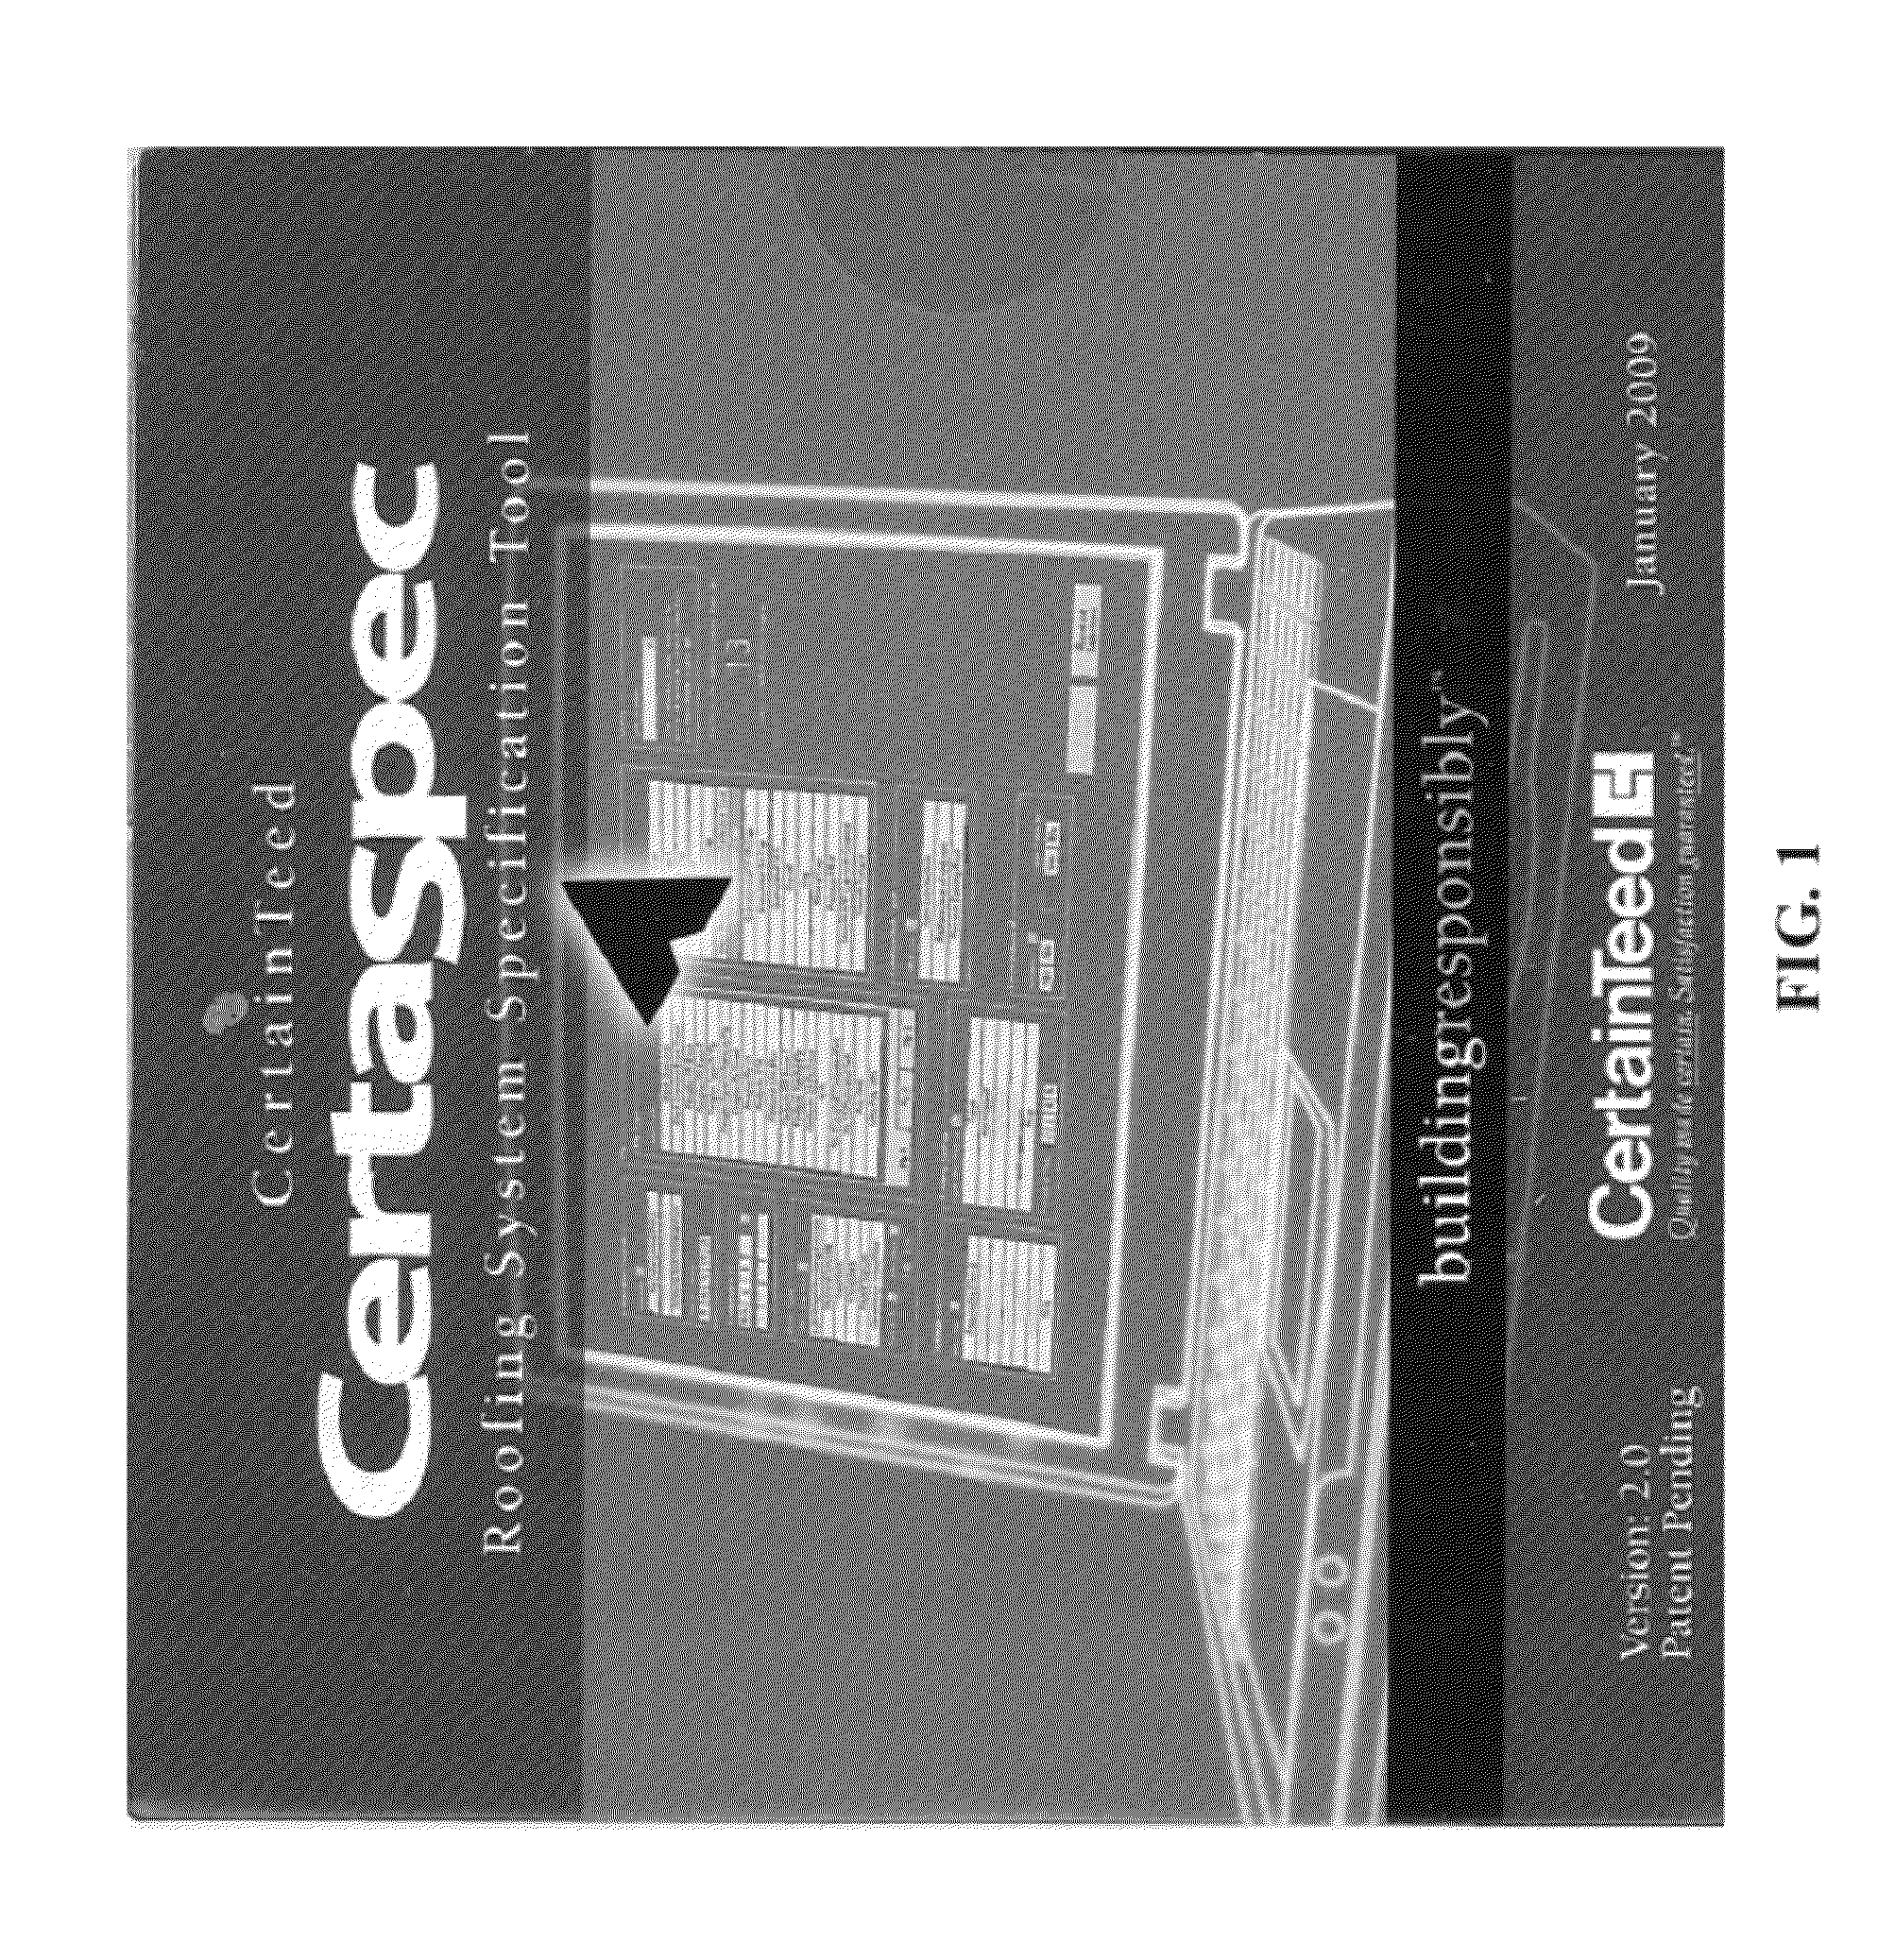 System and method for providing building product specification and product recommendations